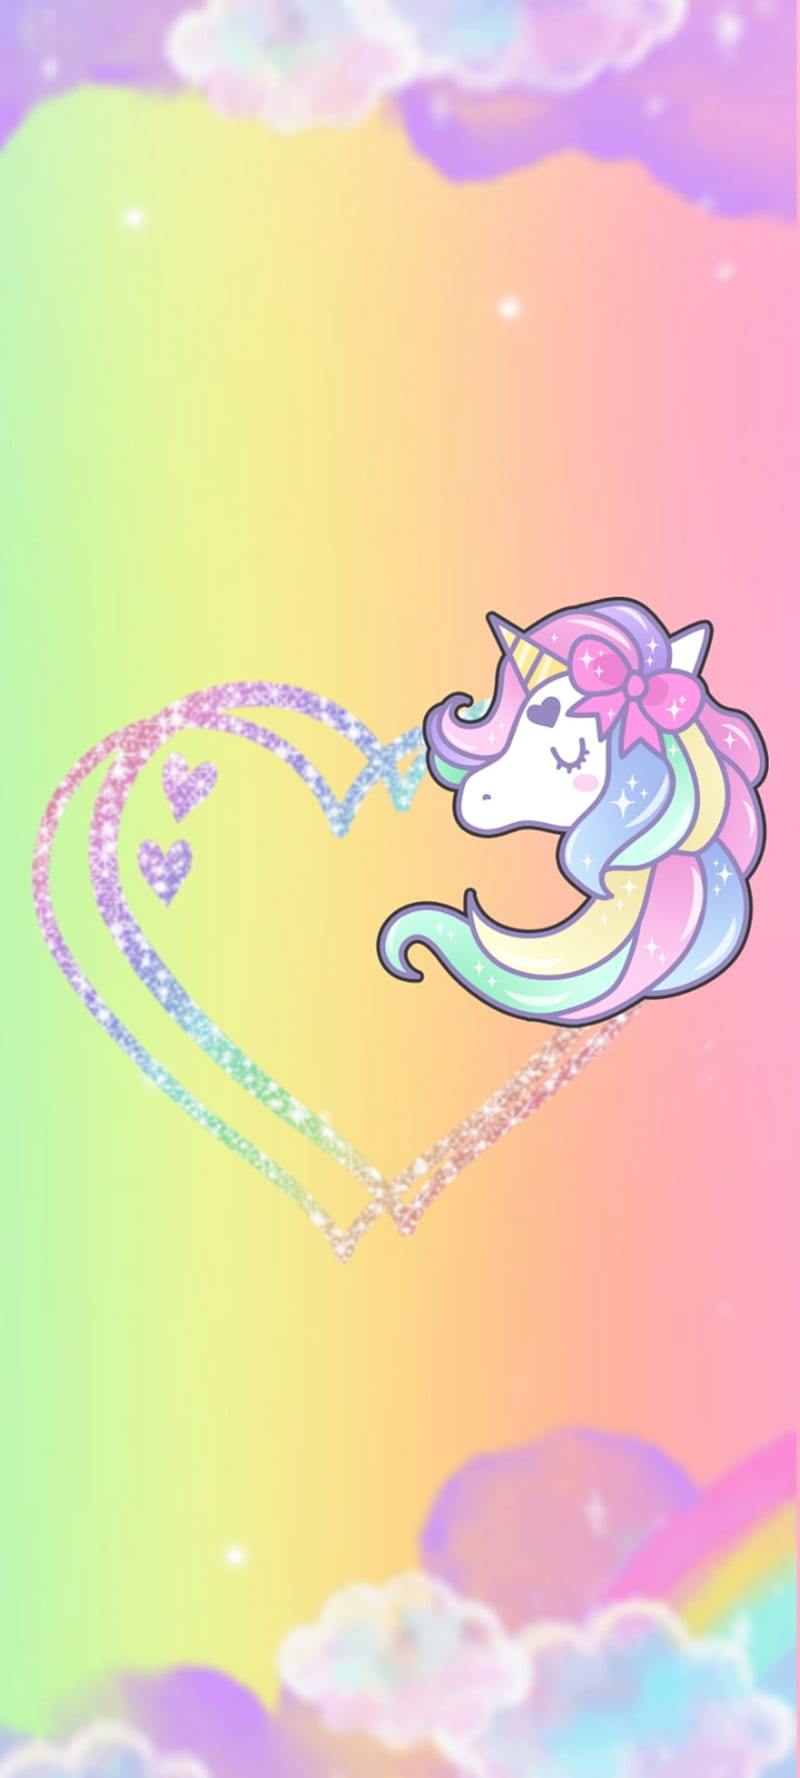 500 Cute Rainbow Unicorn Desktop Wallpapers  Background Beautiful Best  Available For Download Cute Rainbow Unicorn Desktop Images Free On  Zicxacomphotos  Zicxa Photos